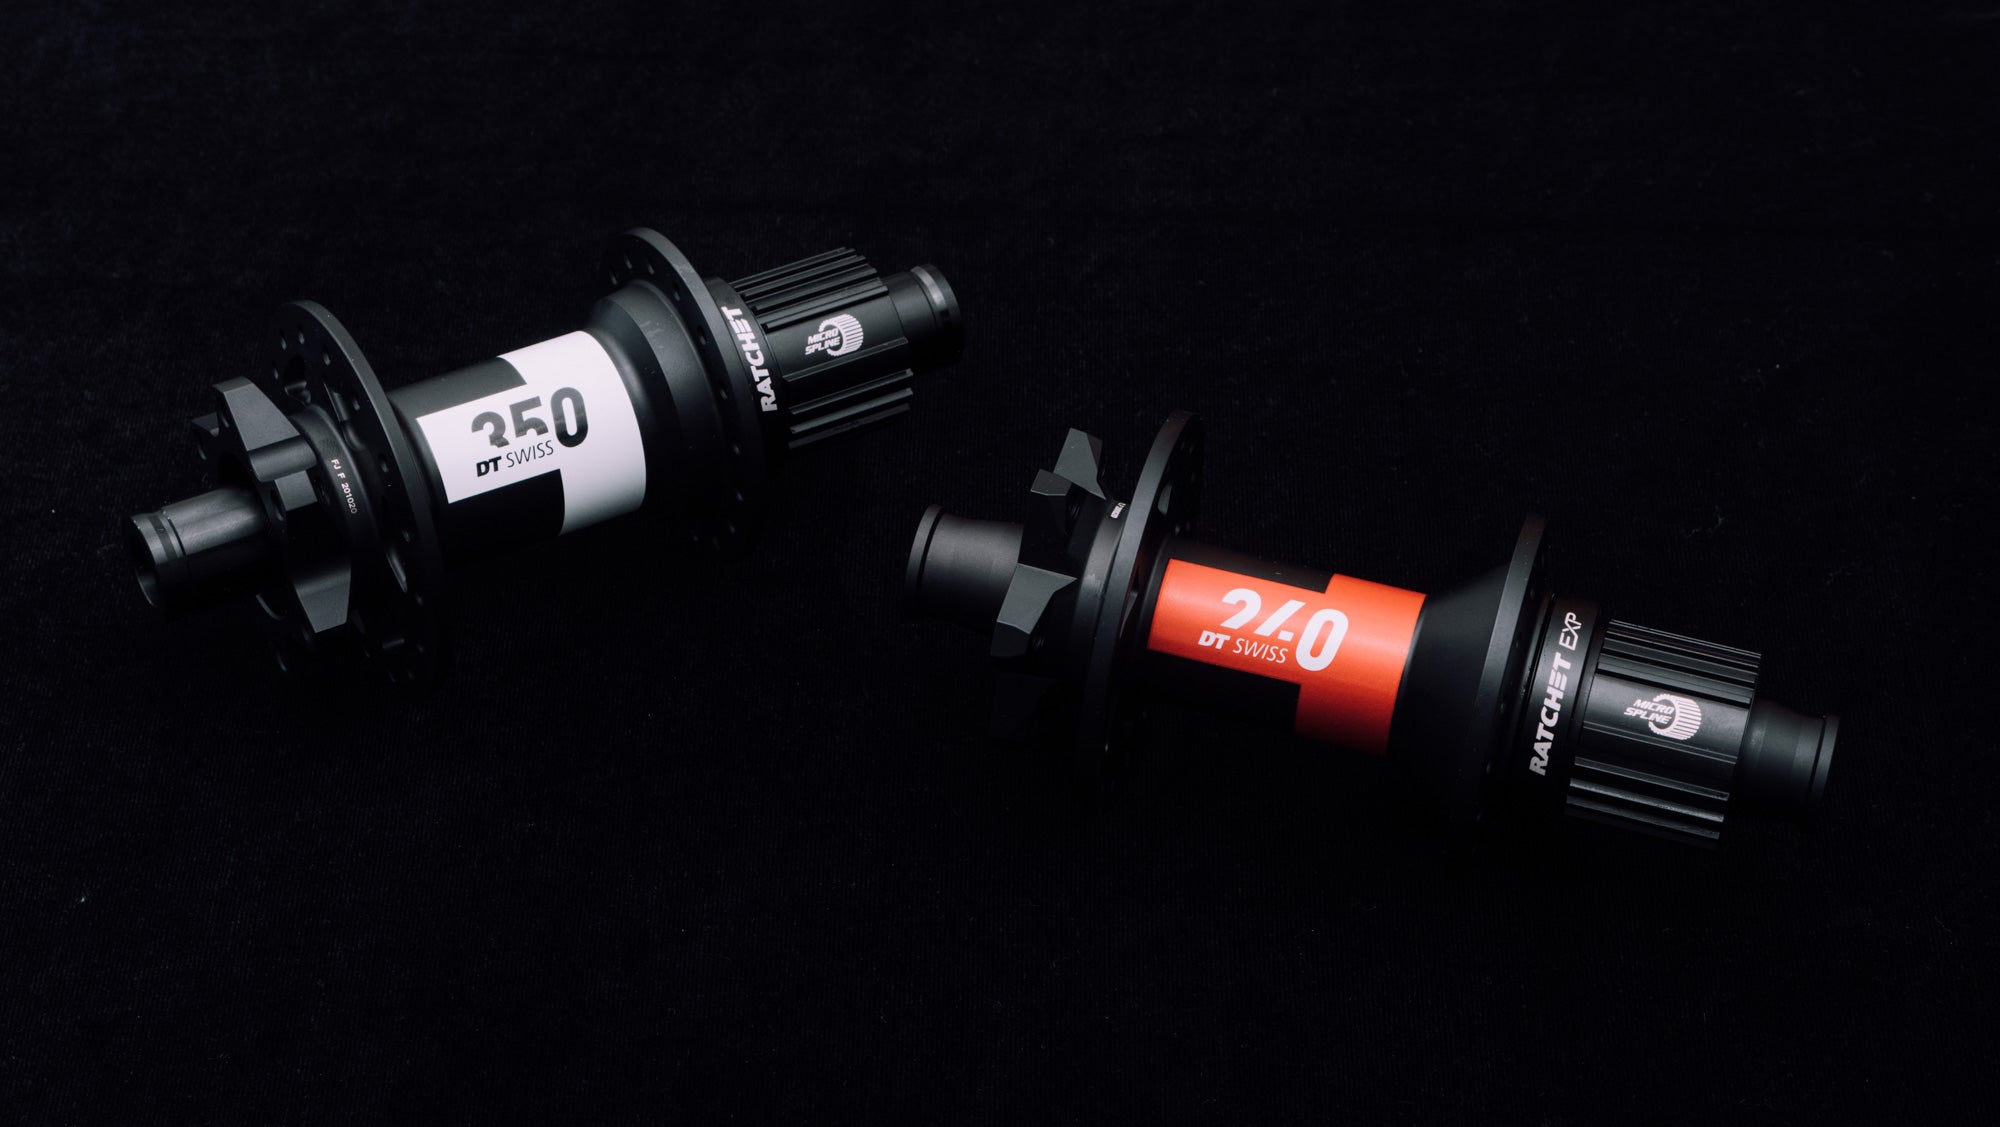 The new DT 350 and 240 mountain bike hubs.